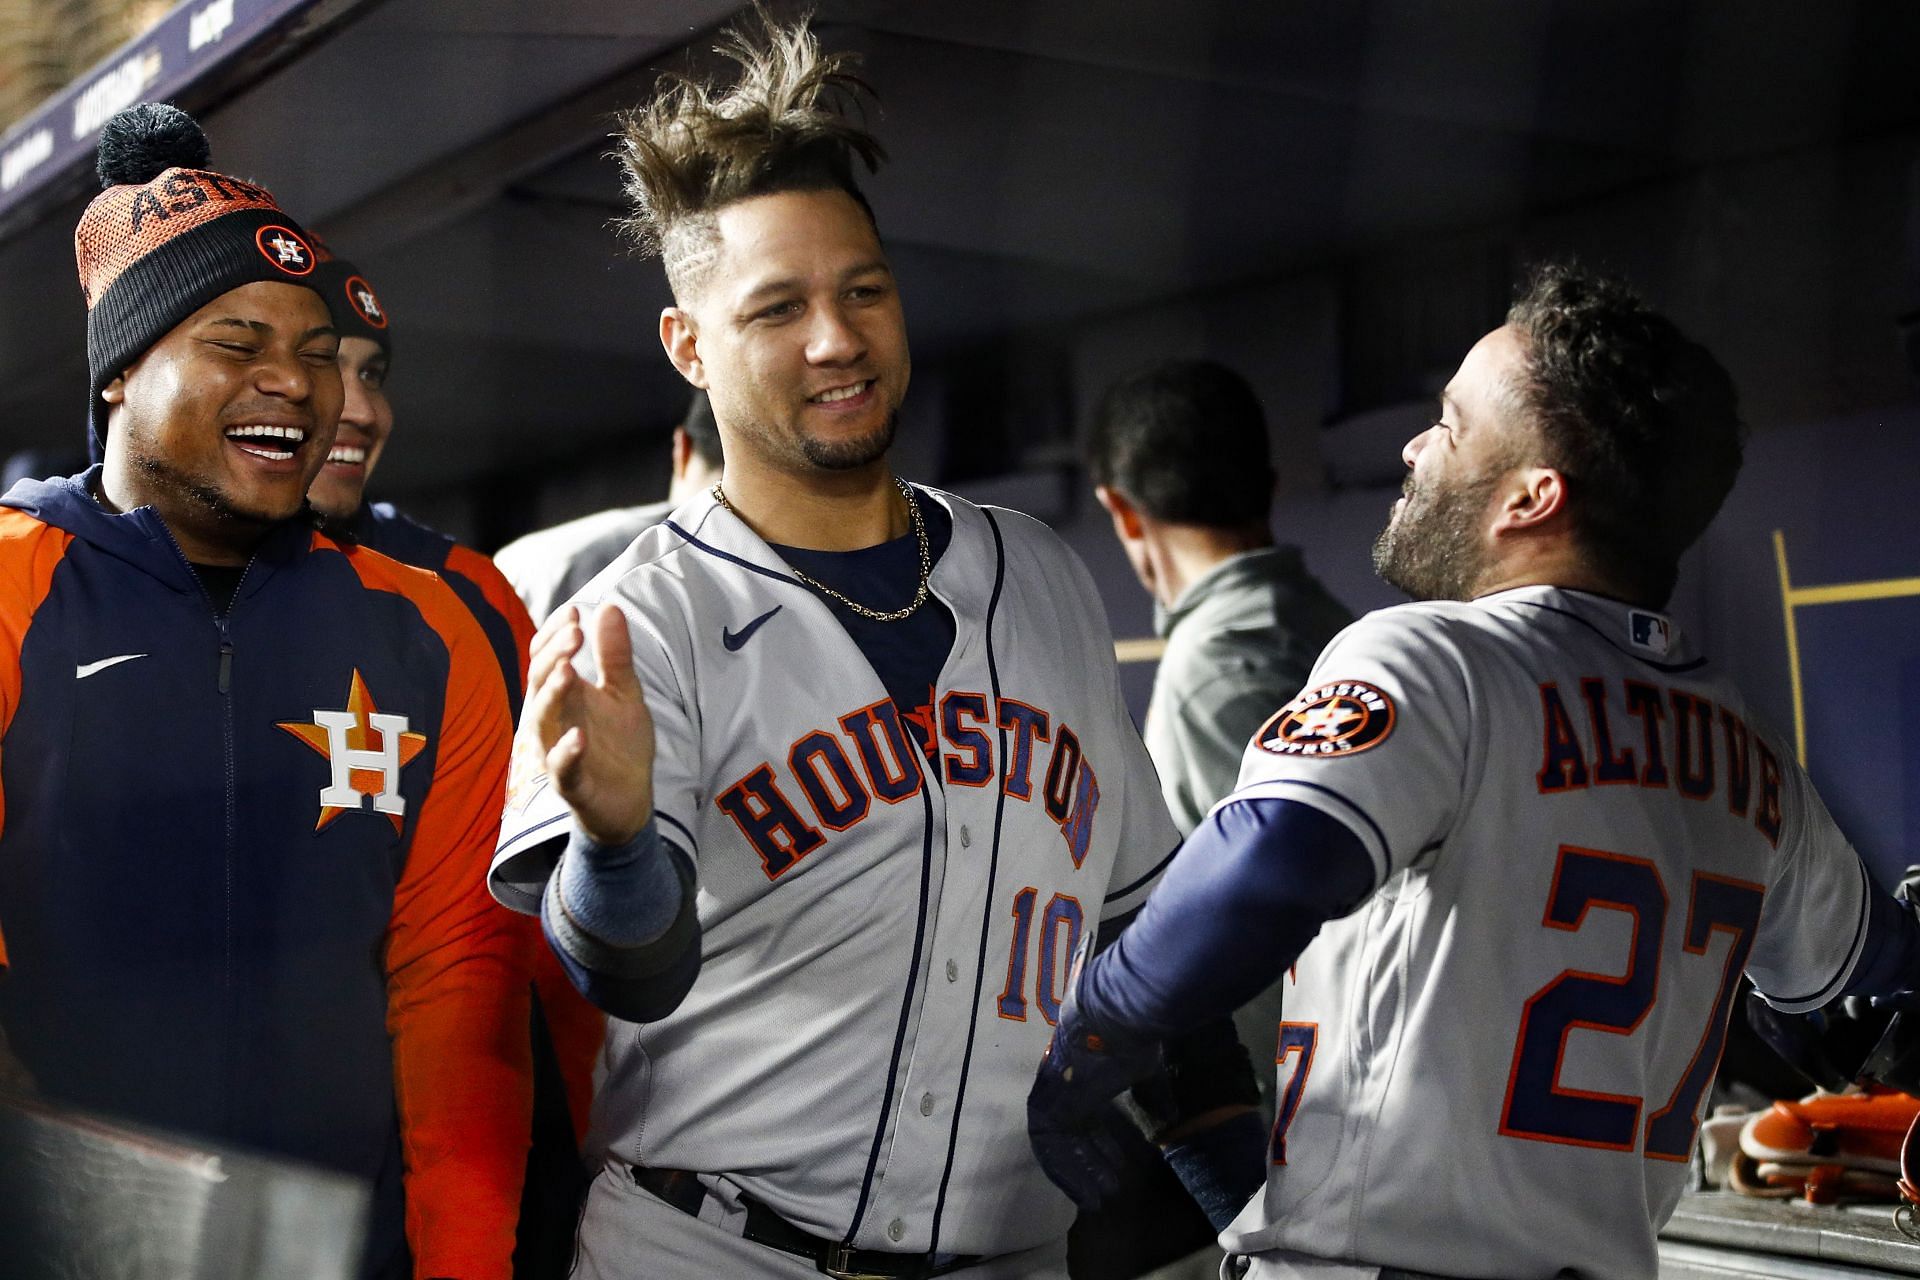 Yuli Gurreil Free agent news: Yuli Gurriel Free Agency: Which teams would  benefit the most from veteran MLB first baseman's signing?